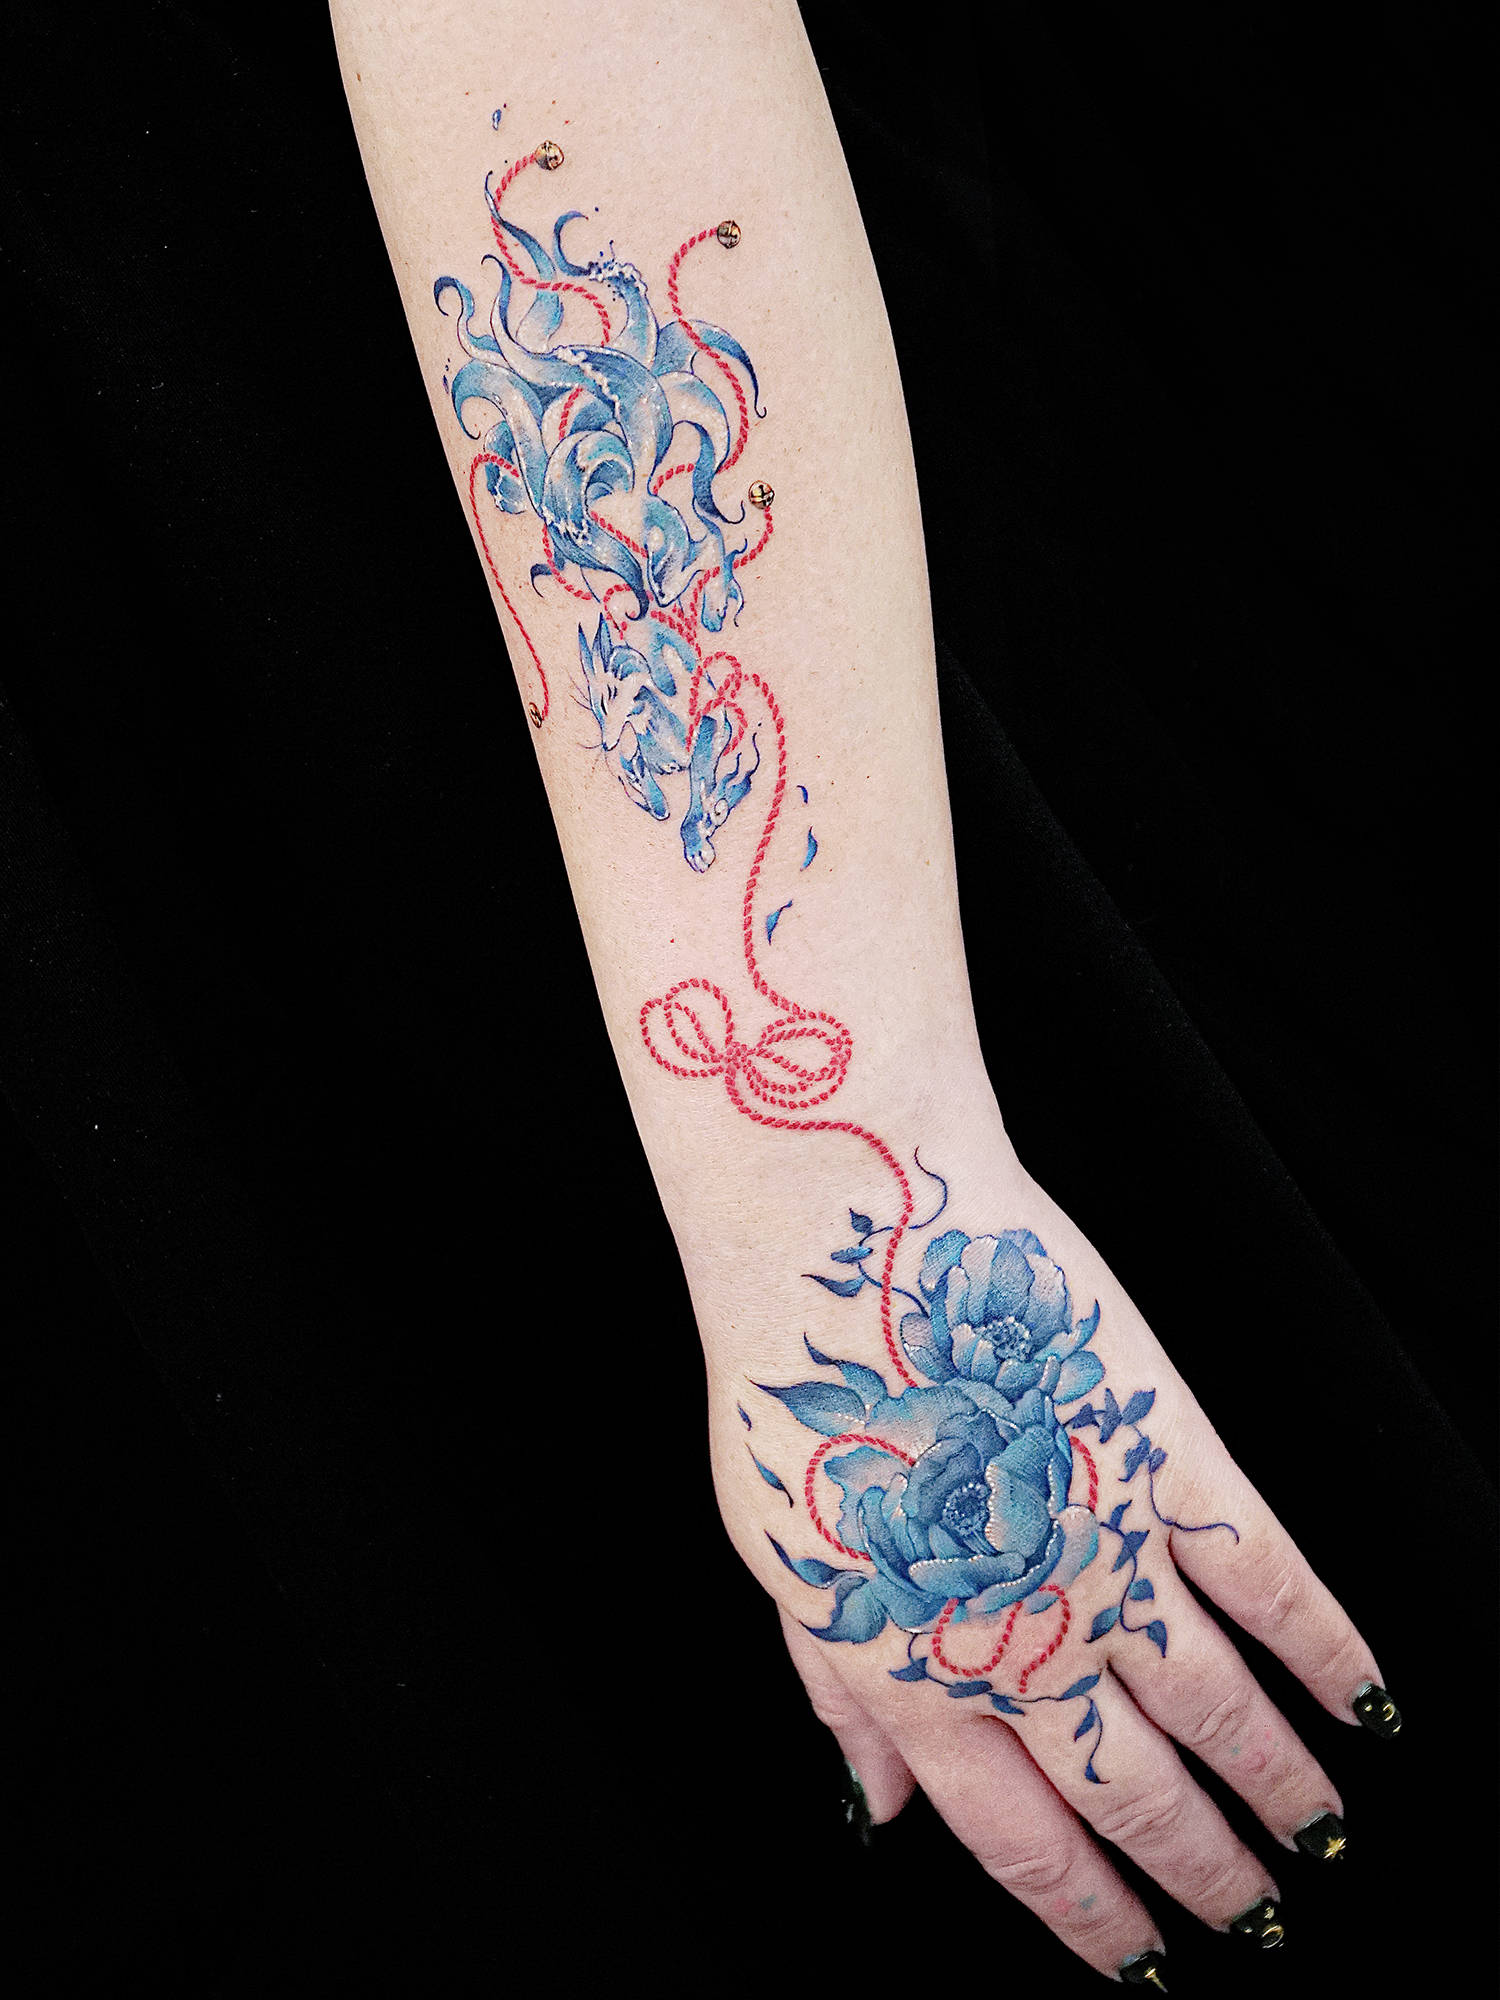 flora and fauna tattoo on arm, blue ink